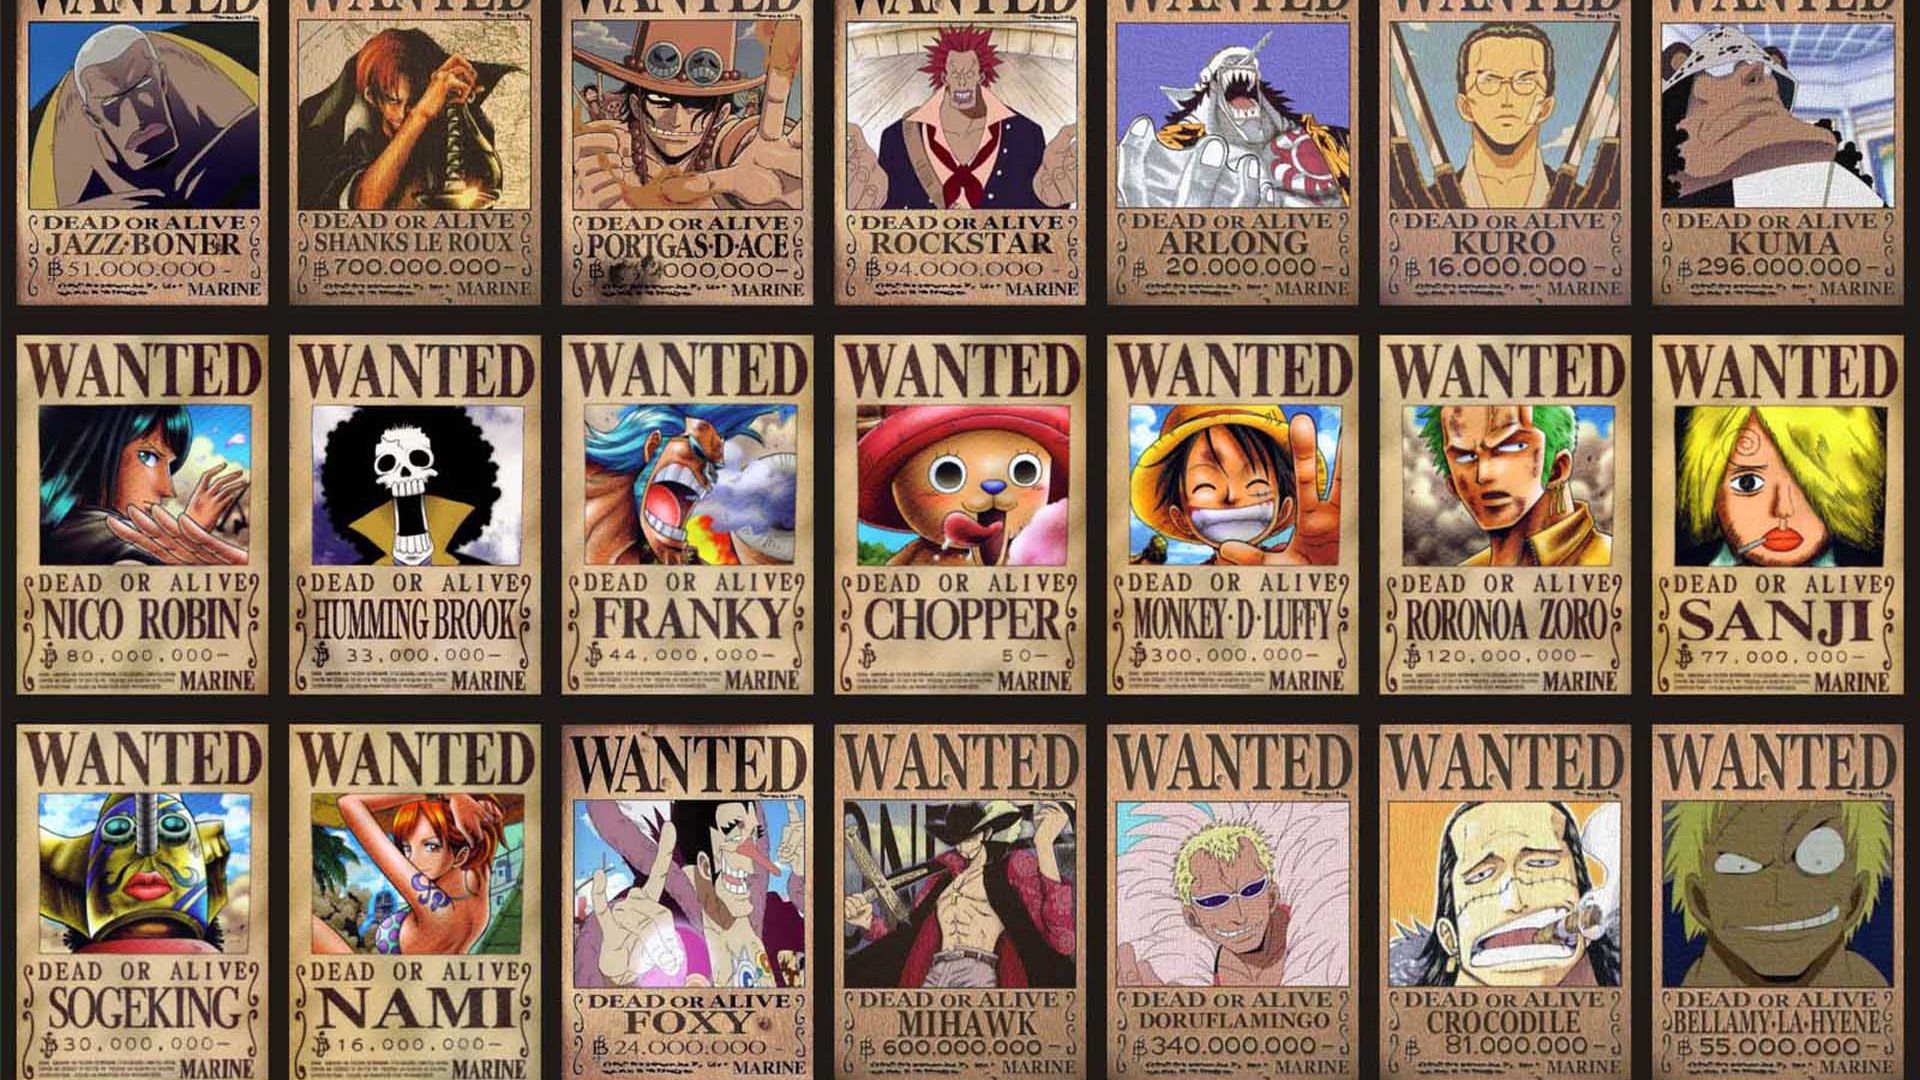 One Piece Wanted Posters wallpaper in 1920x1080 resolution